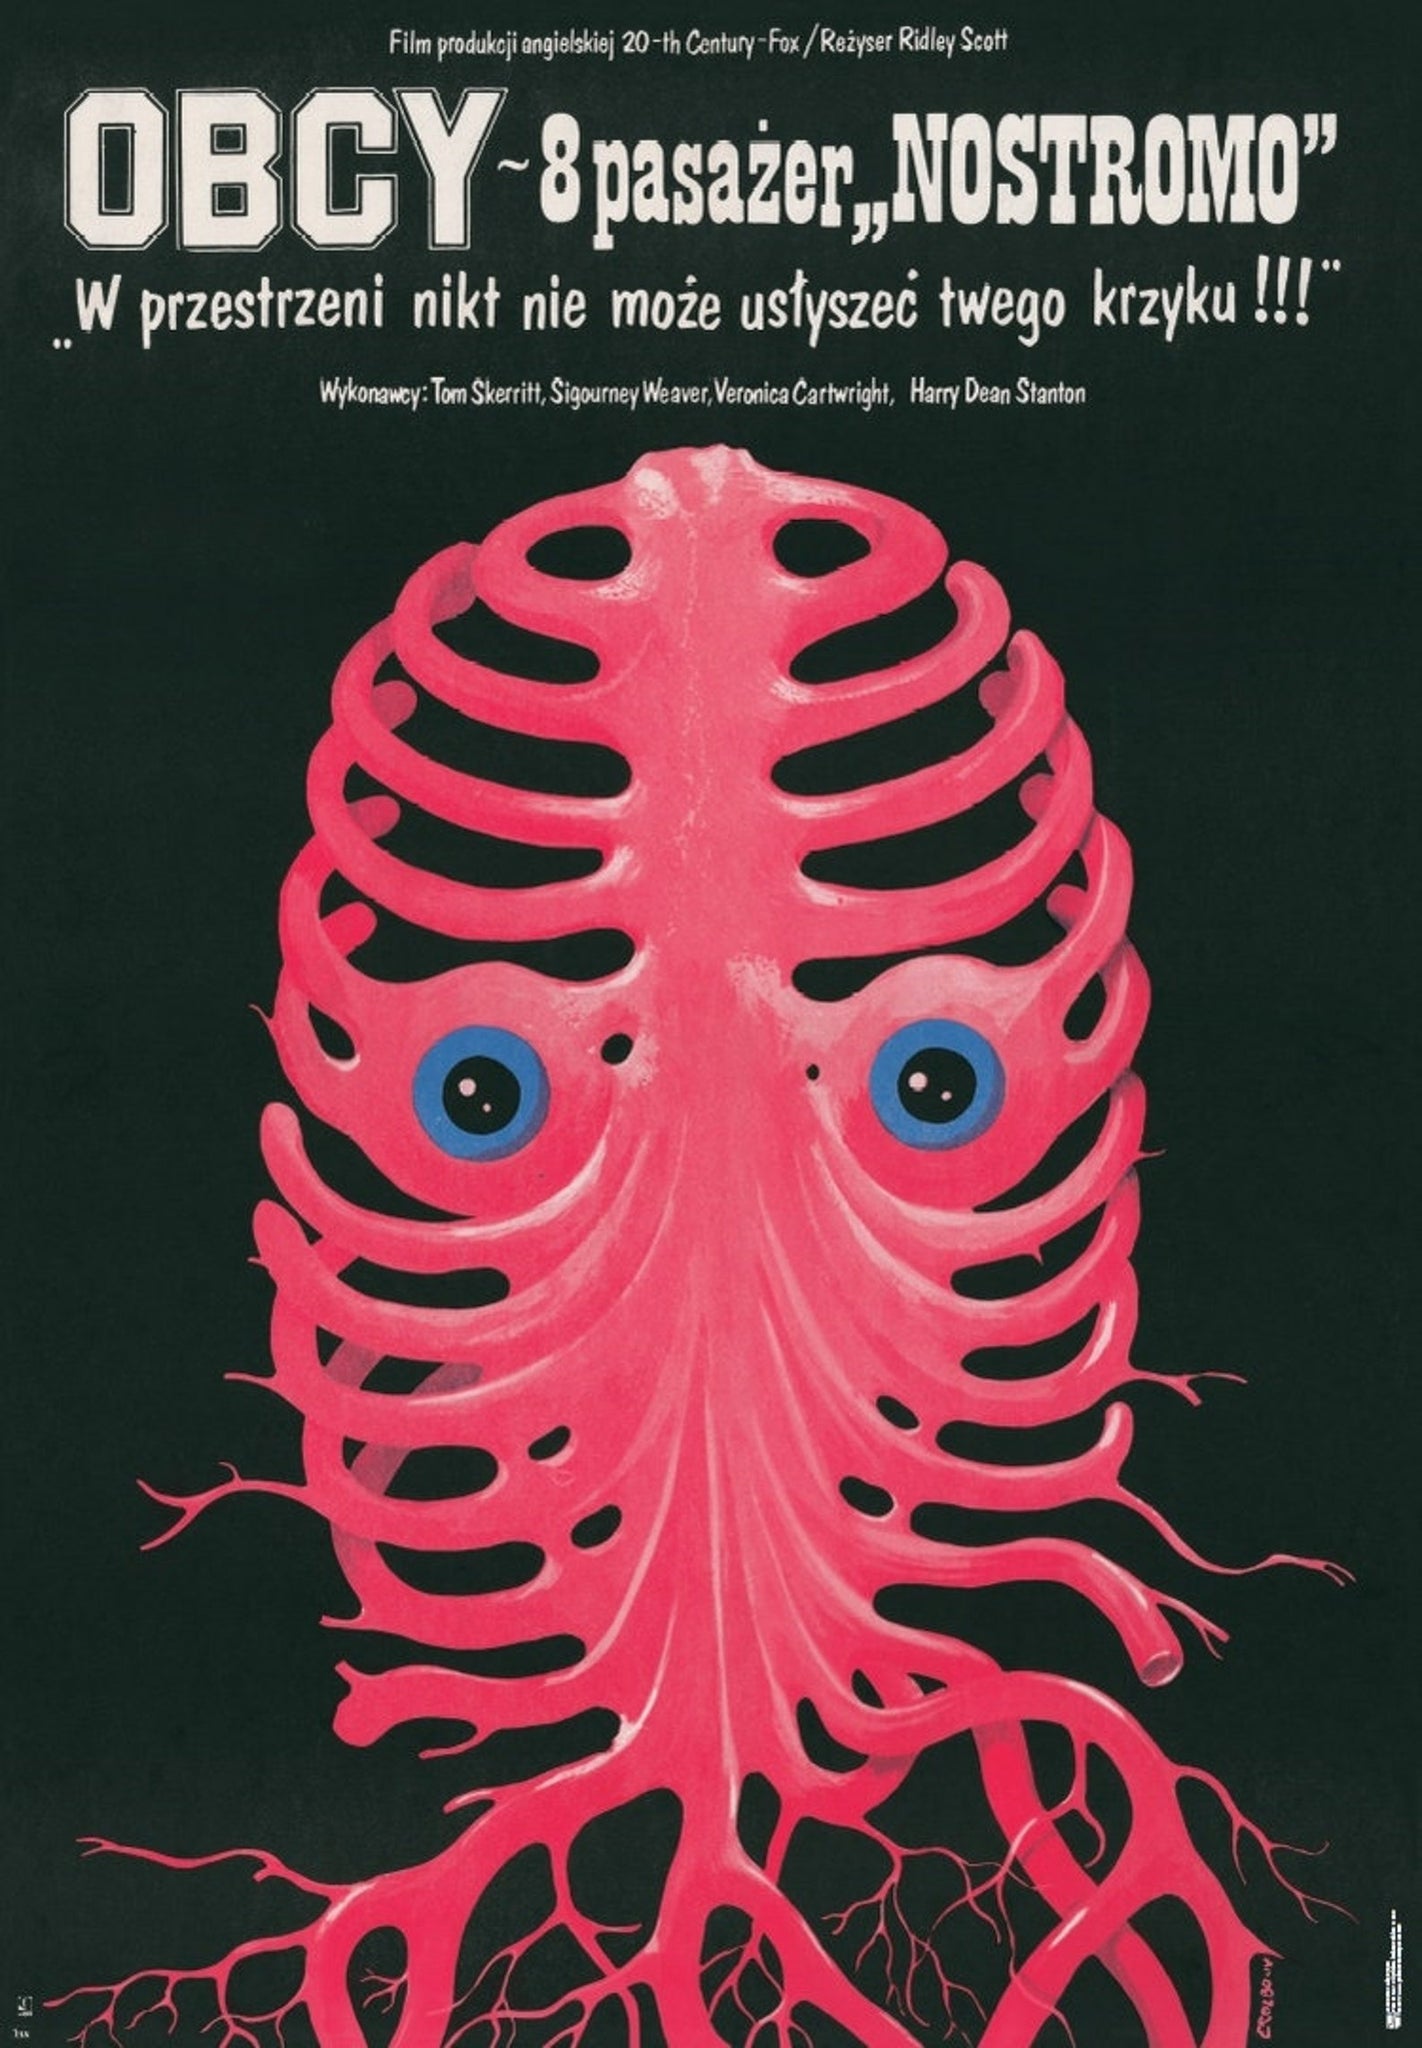 An official Limited Edition Polish School of Posters reprint (c.500) of 1979 US sci-fi horror classic Alien.